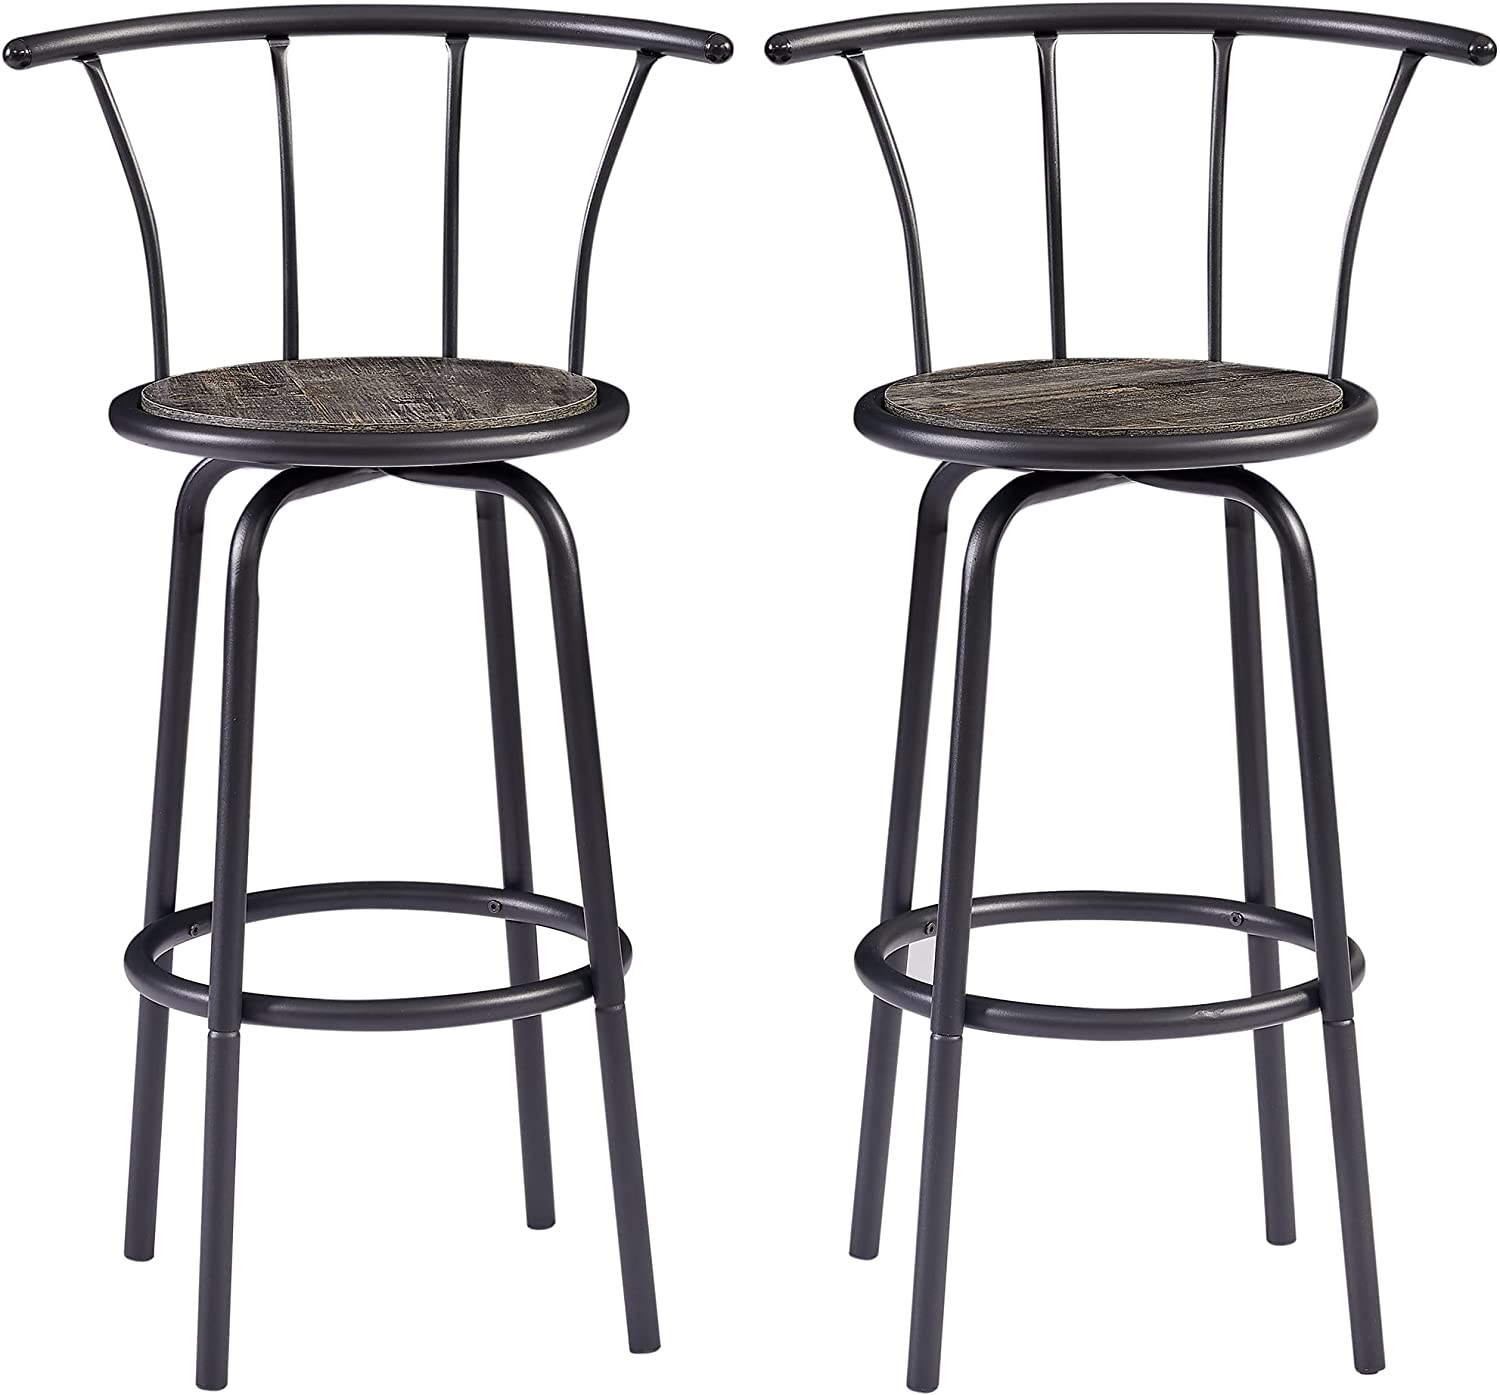 VECELO 27.3 Inch Bar Stools Set of 2 with Back Metal